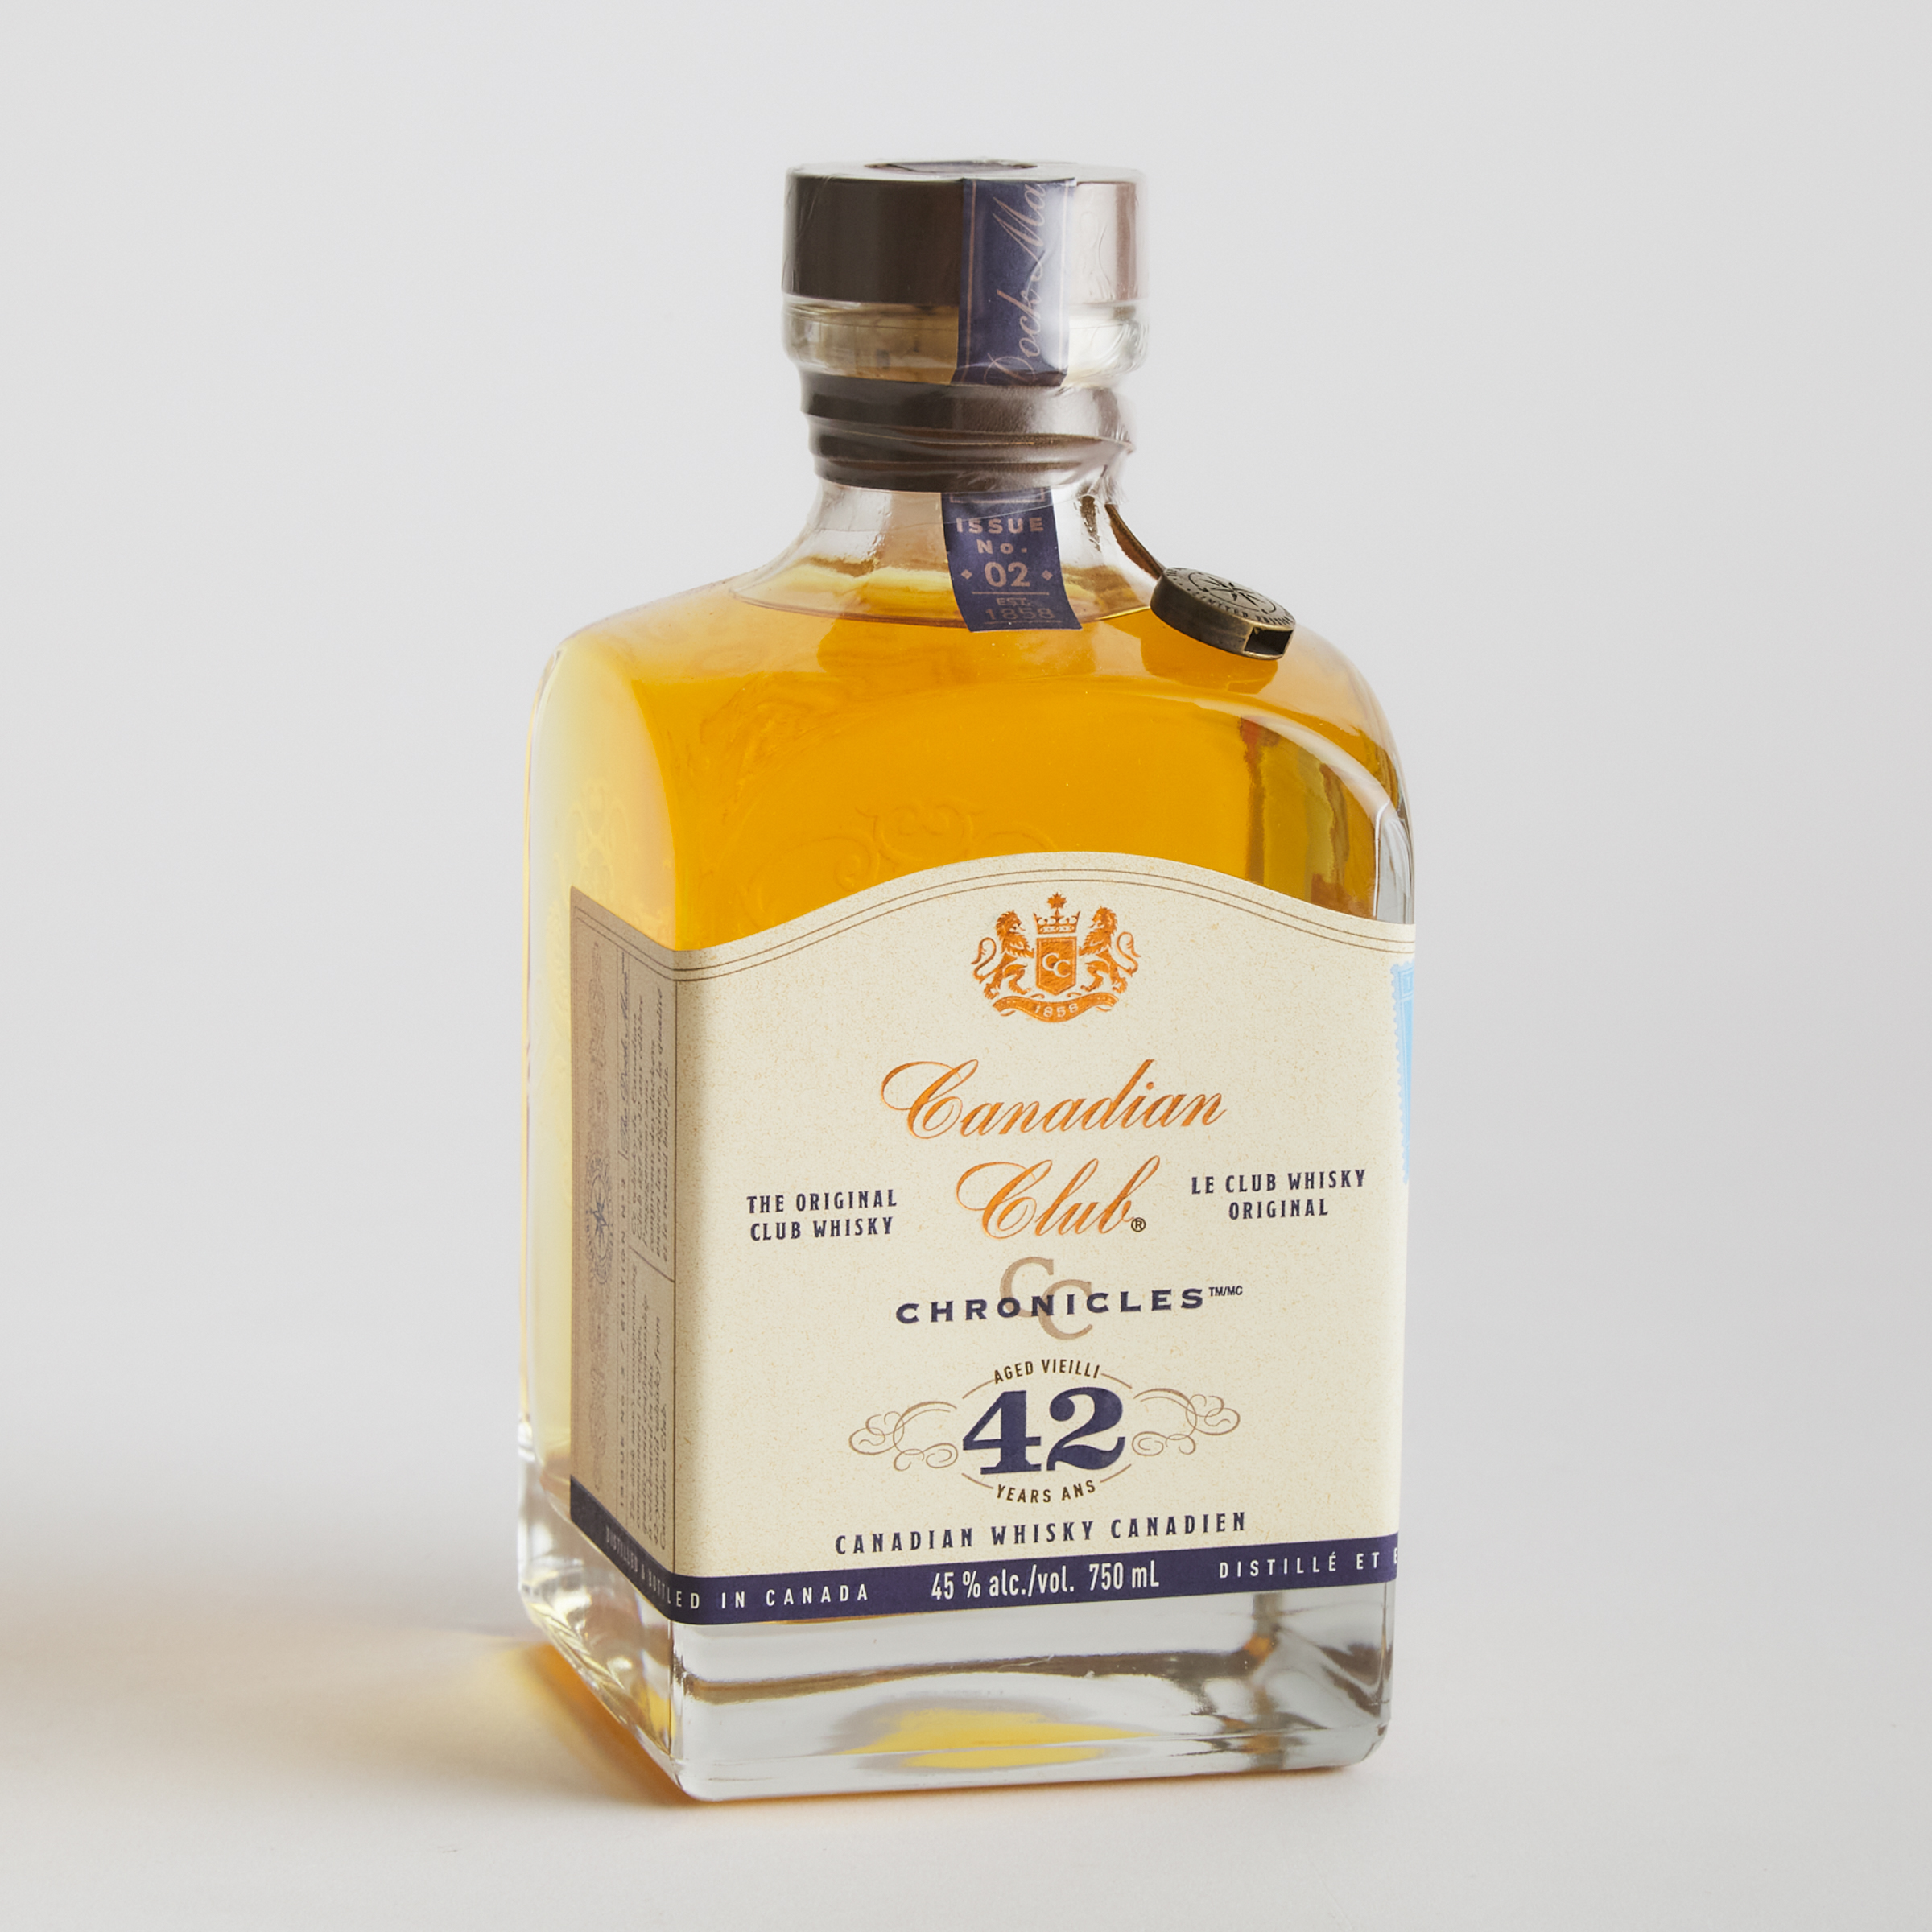 CANADIAN CLUB CANADIAN WHISKY 42 YEARS (ONE 750 ML)